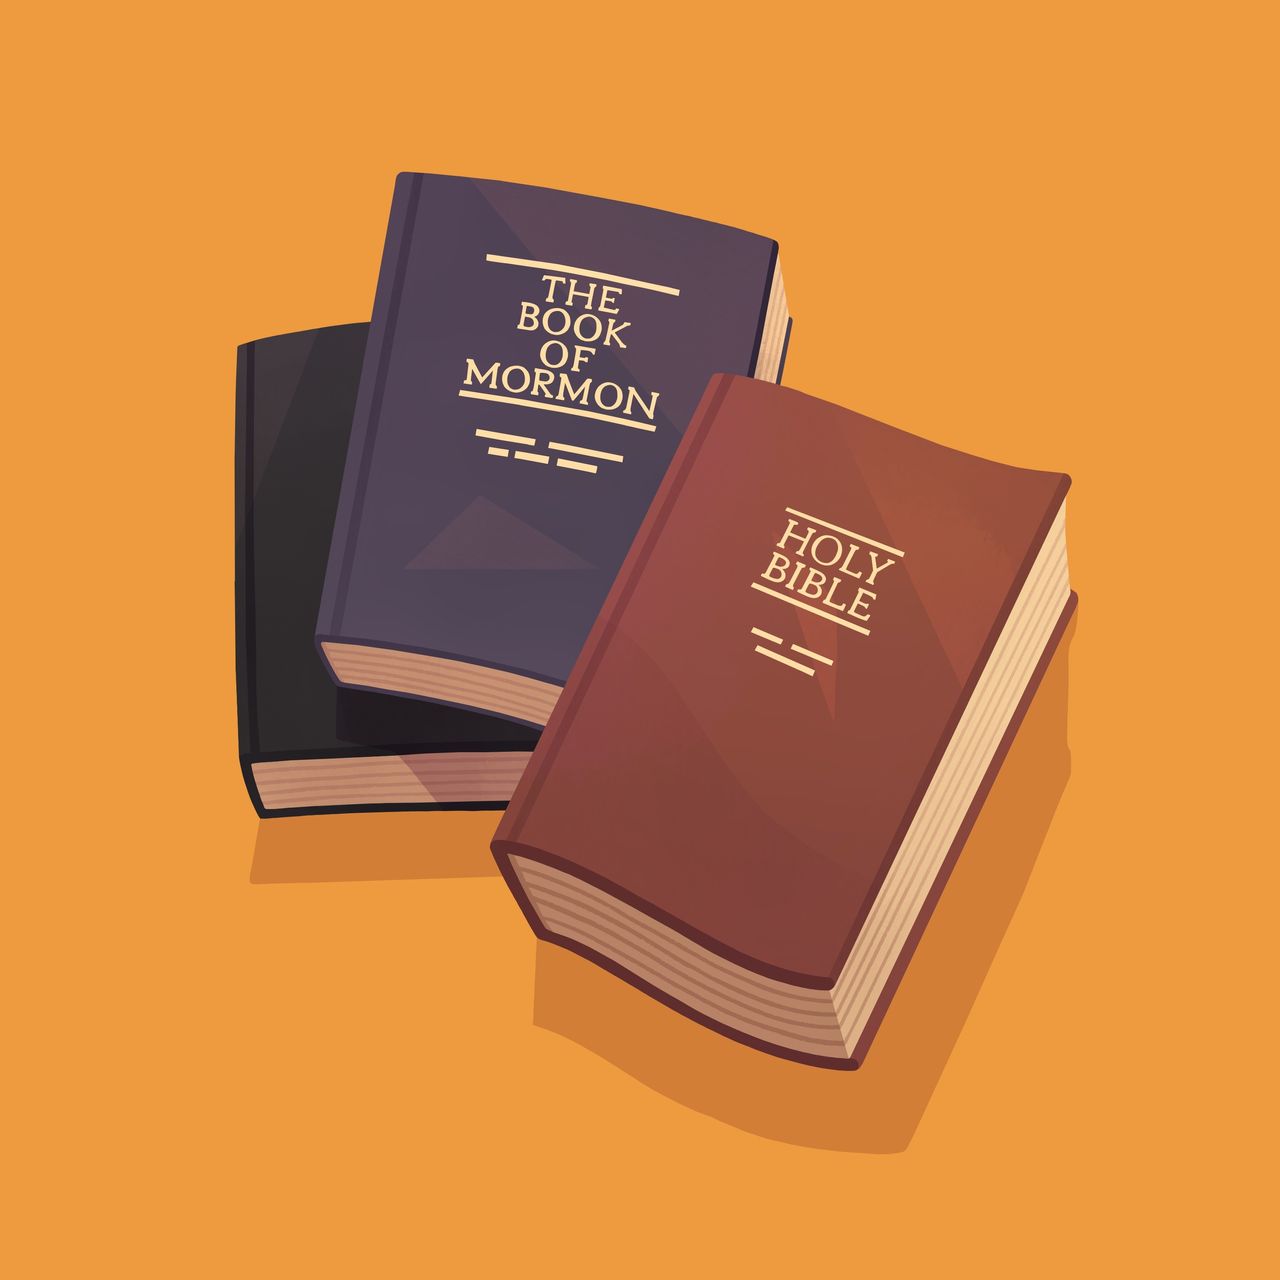 book of mormon and bible